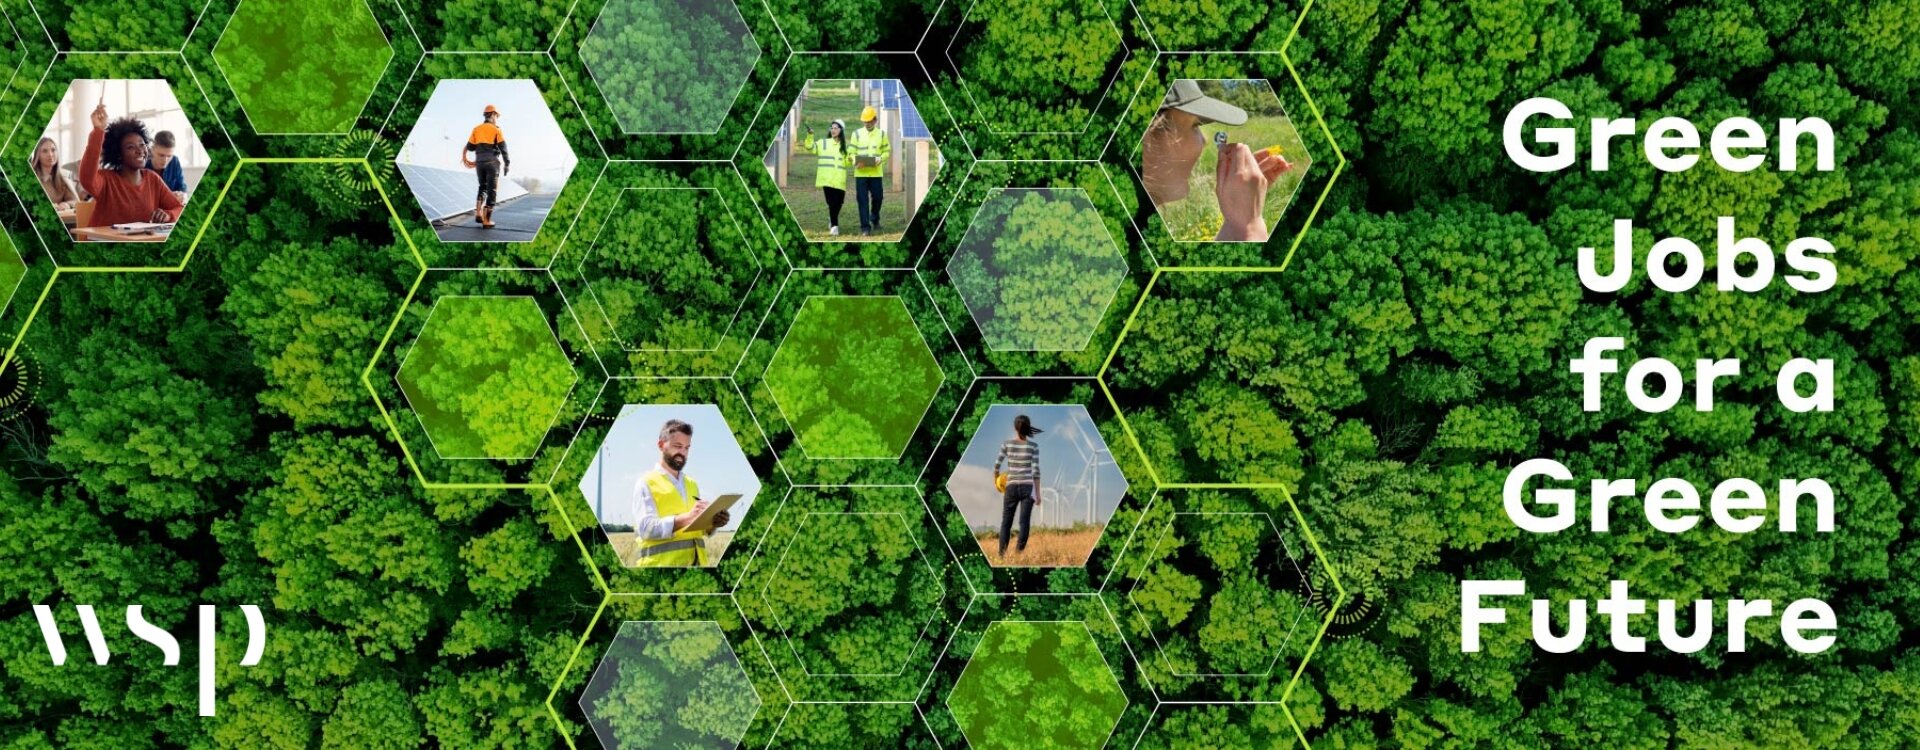 Image with background of trees with large white text that reads Green Jobs for a Green Future and white hexagonal overlay including images of engineers and ecologists